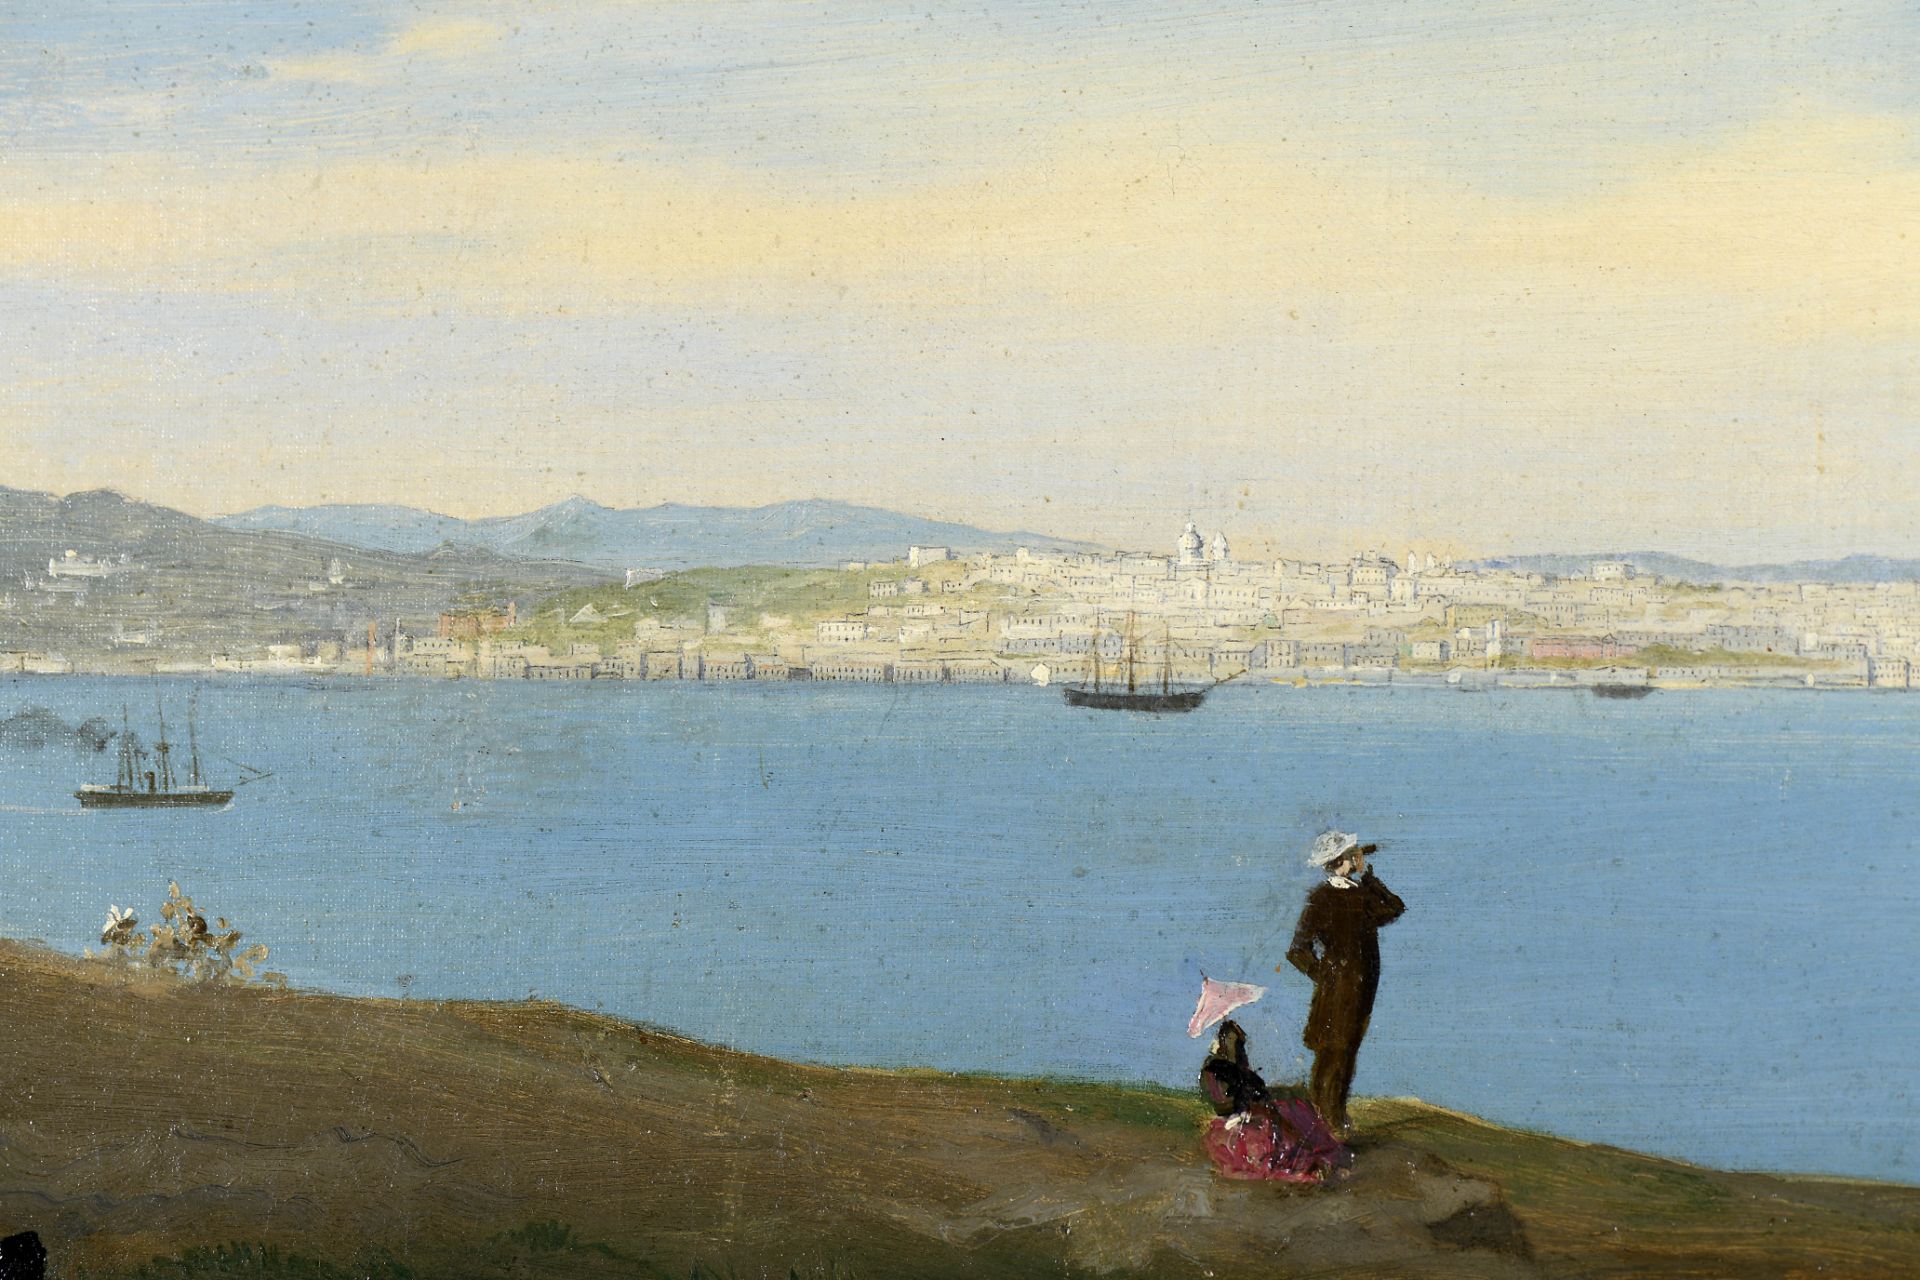 View of the Tagus from the Santos Palace" and "View of Lisbon from the south bank of the Tagus River - Image 11 of 14